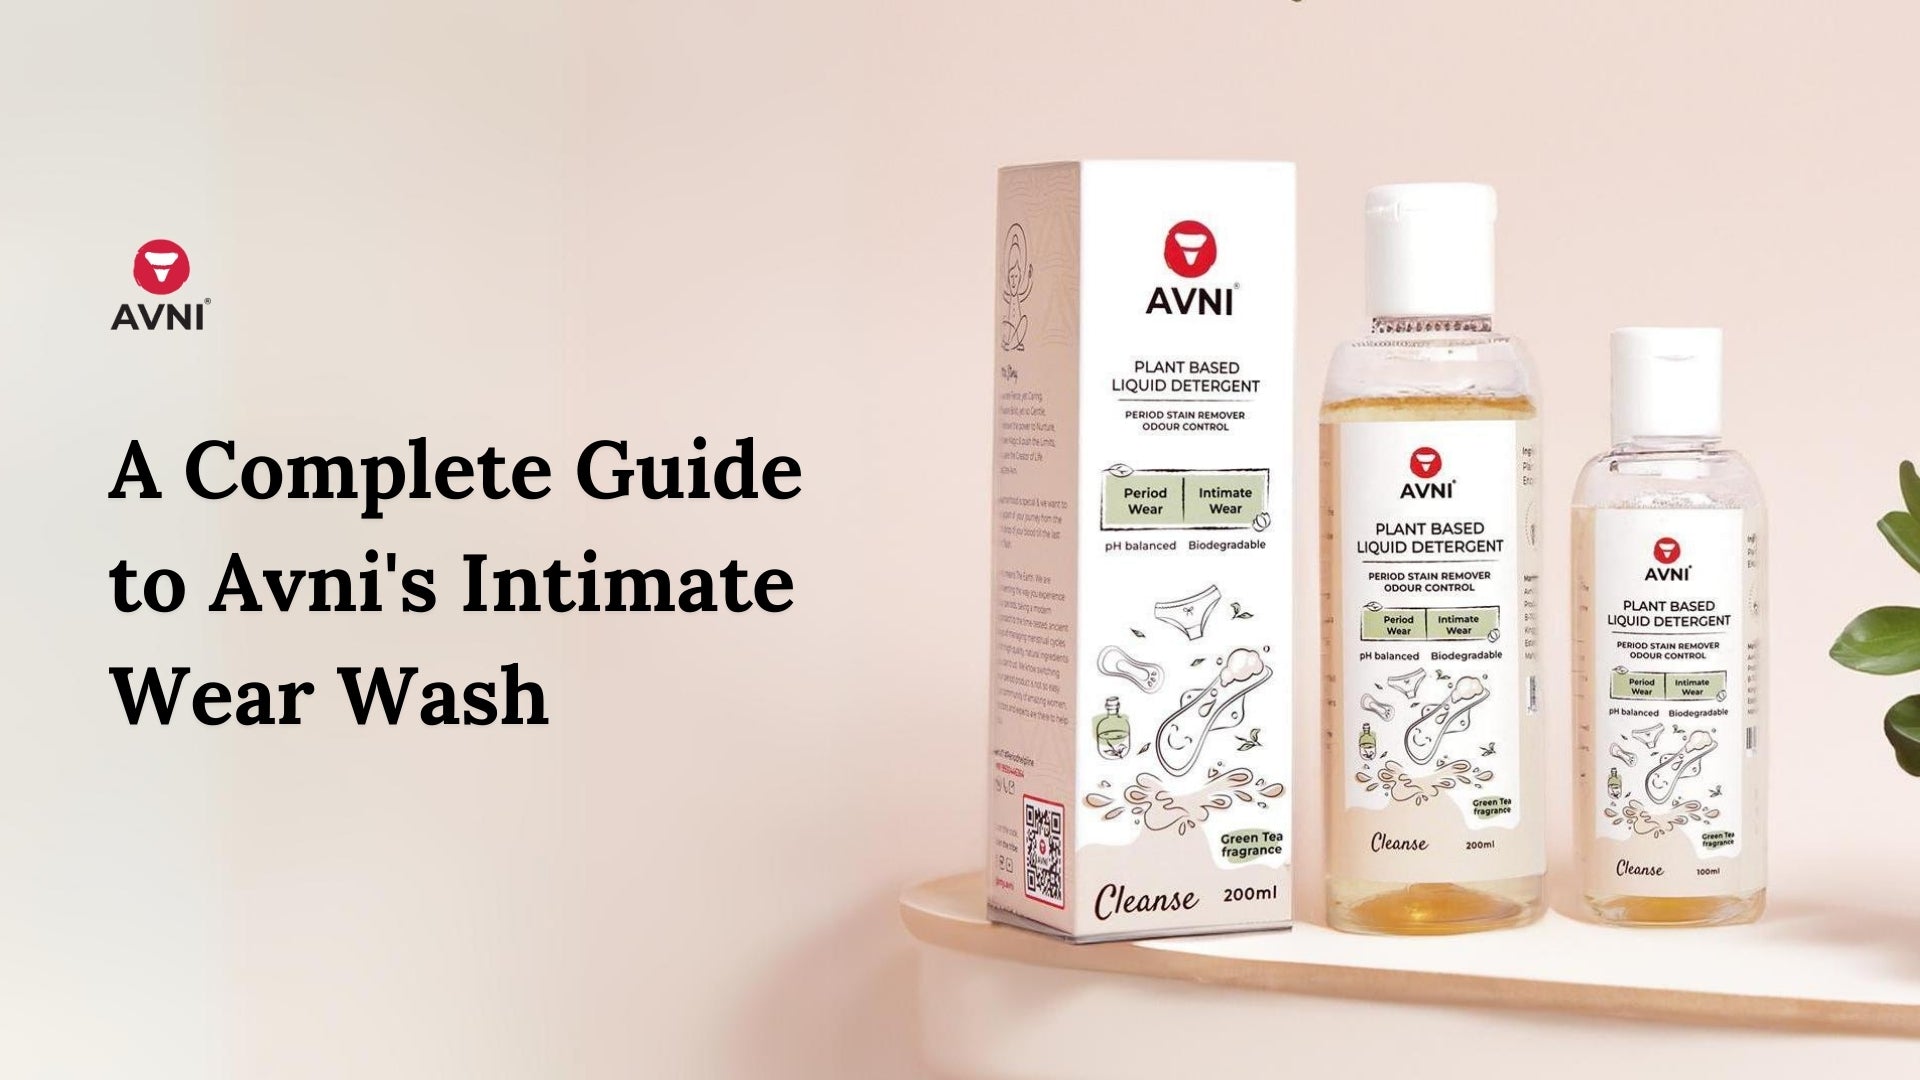 A Complete Guide to Avni's Intimate Wear Wash